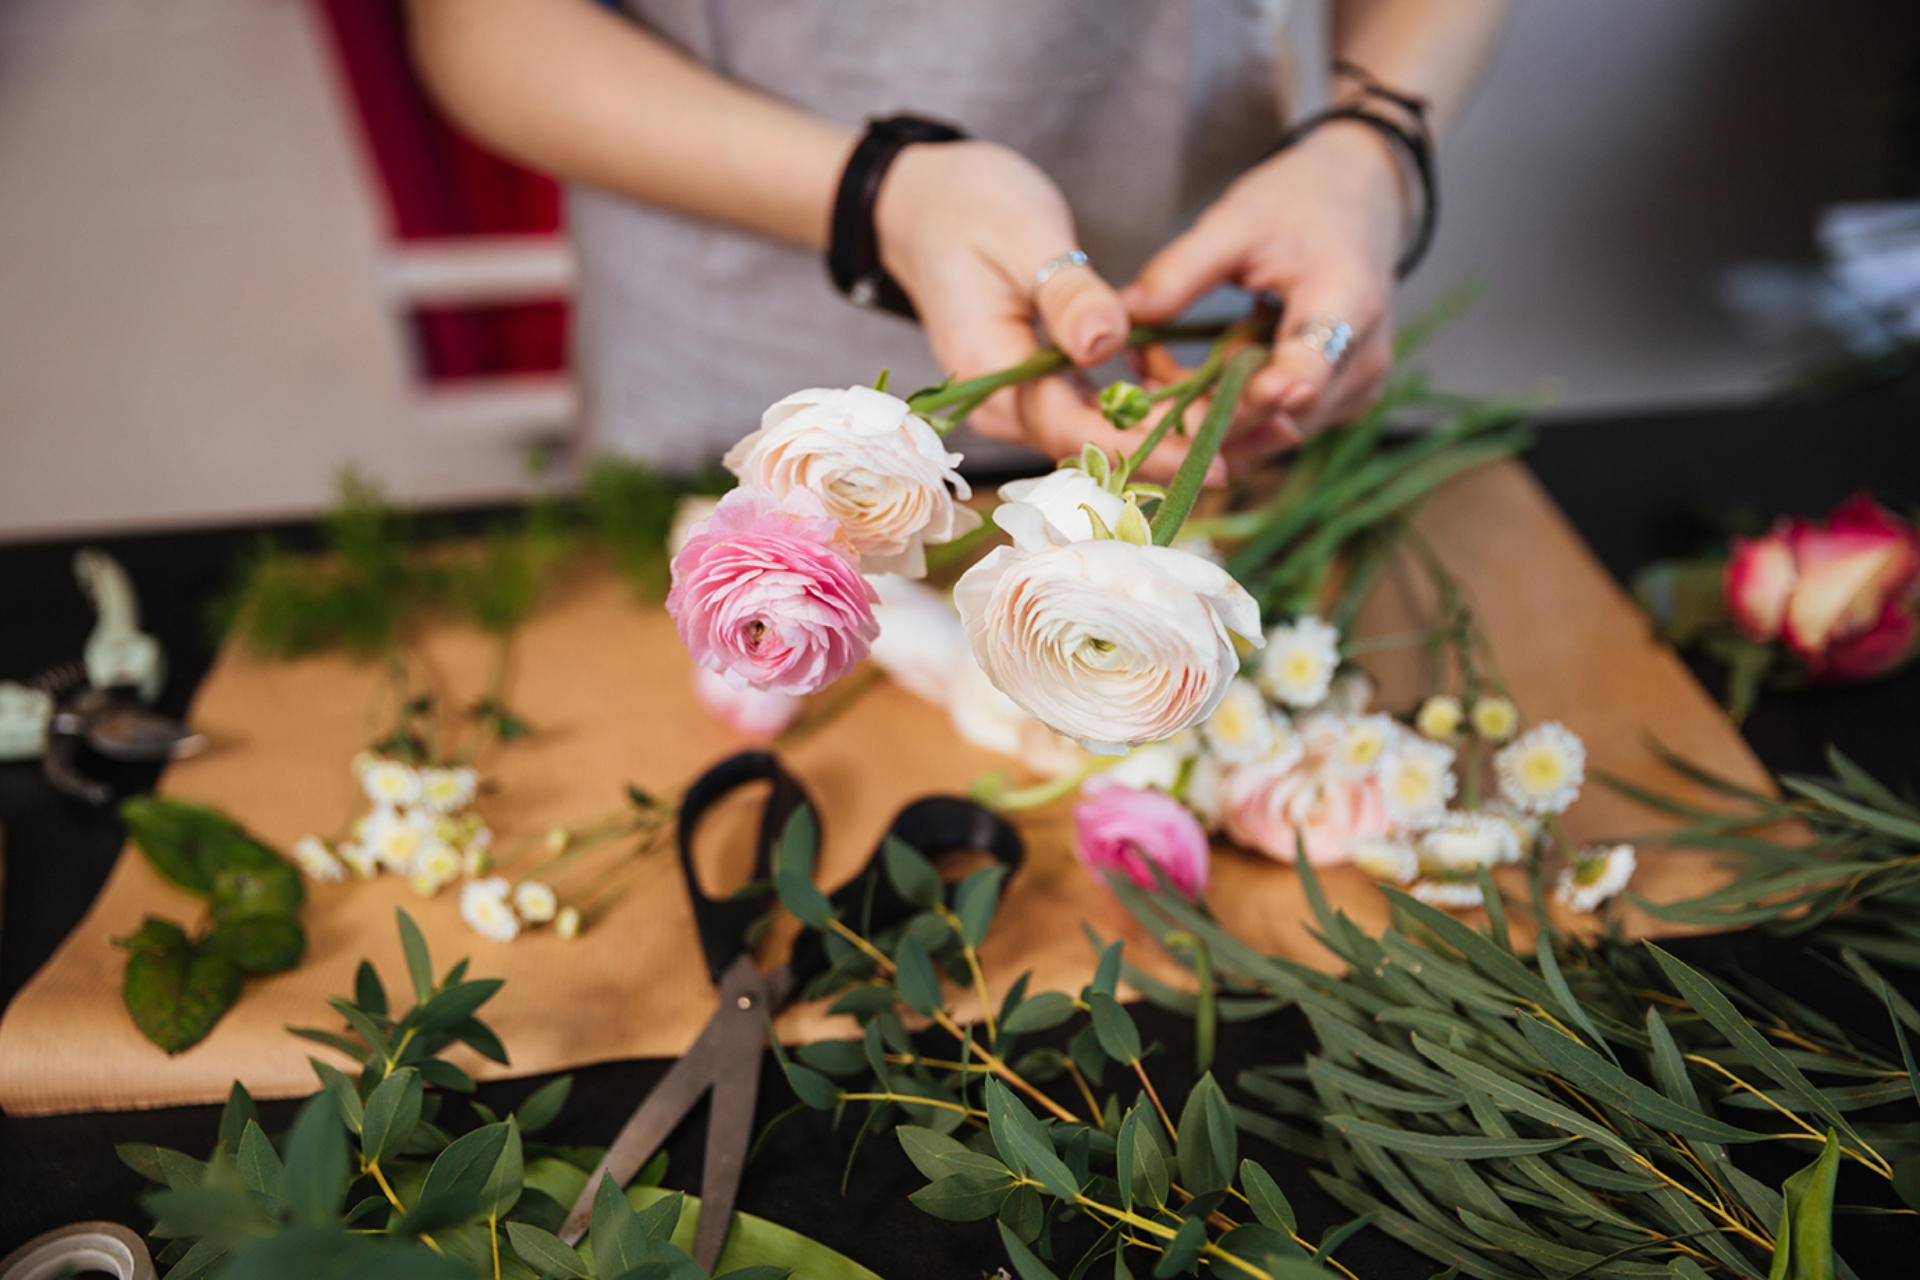 A woman cutting flowers to create a floral arrangement